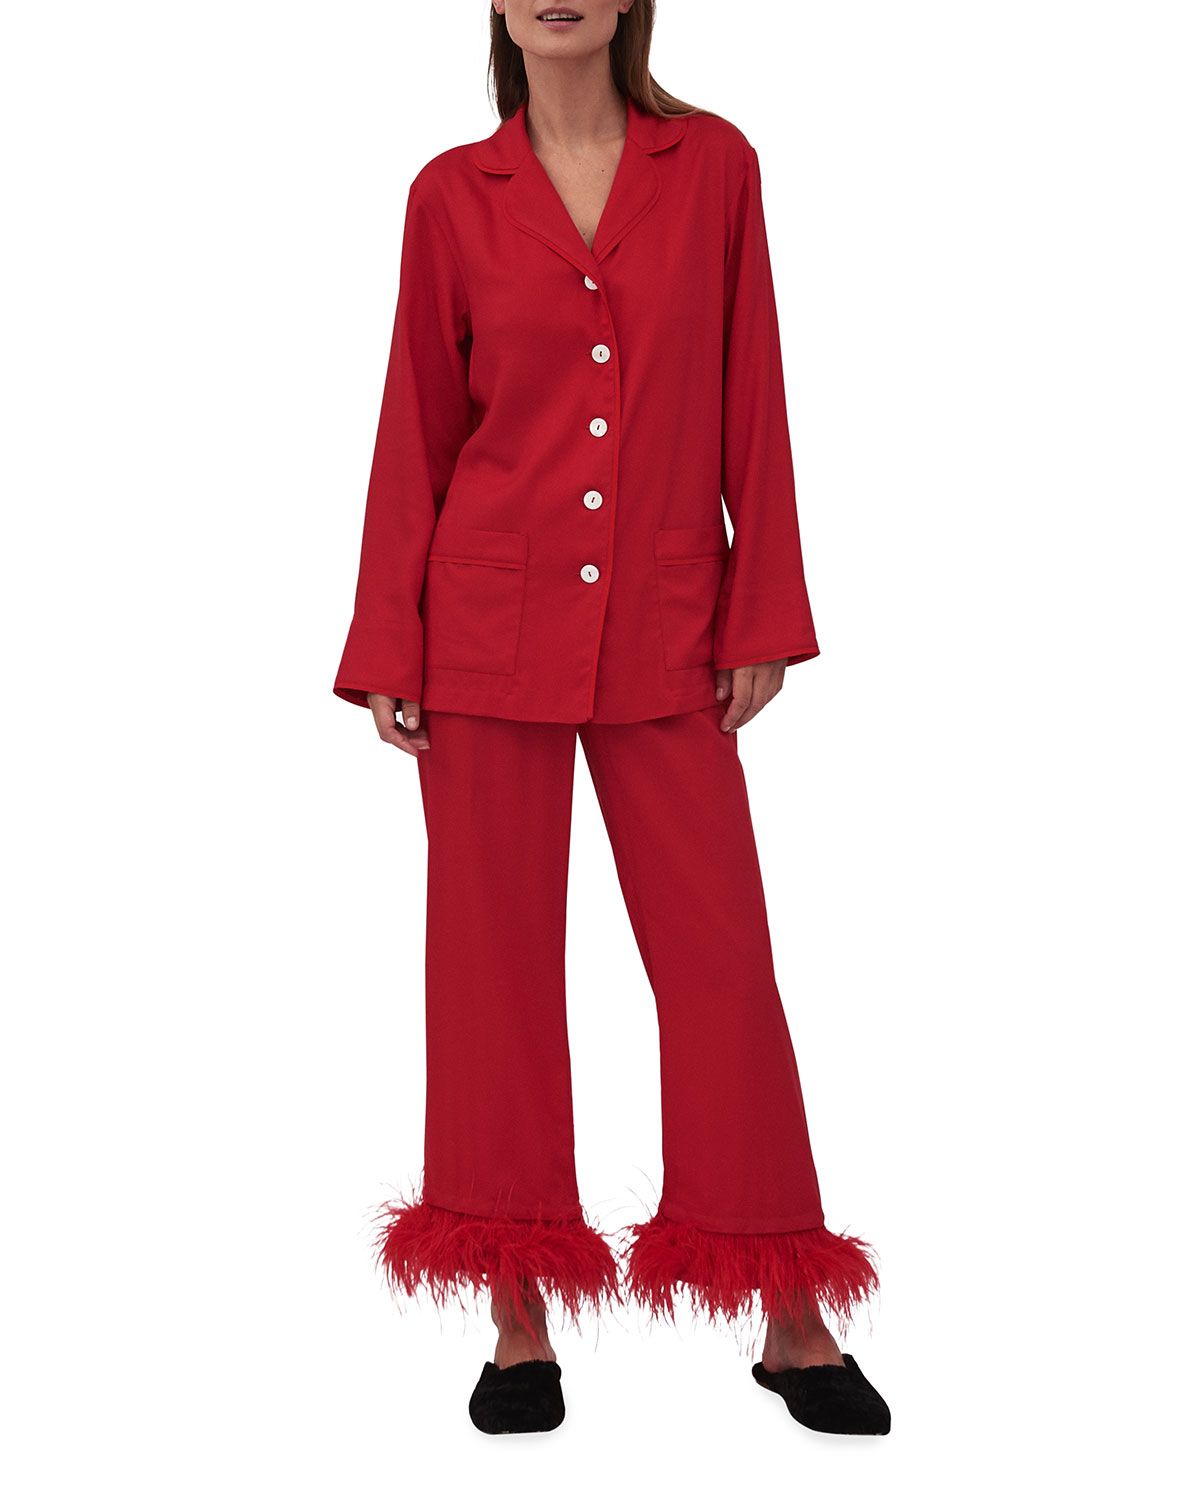 Party Pajama Set with Feathers | Neiman Marcus